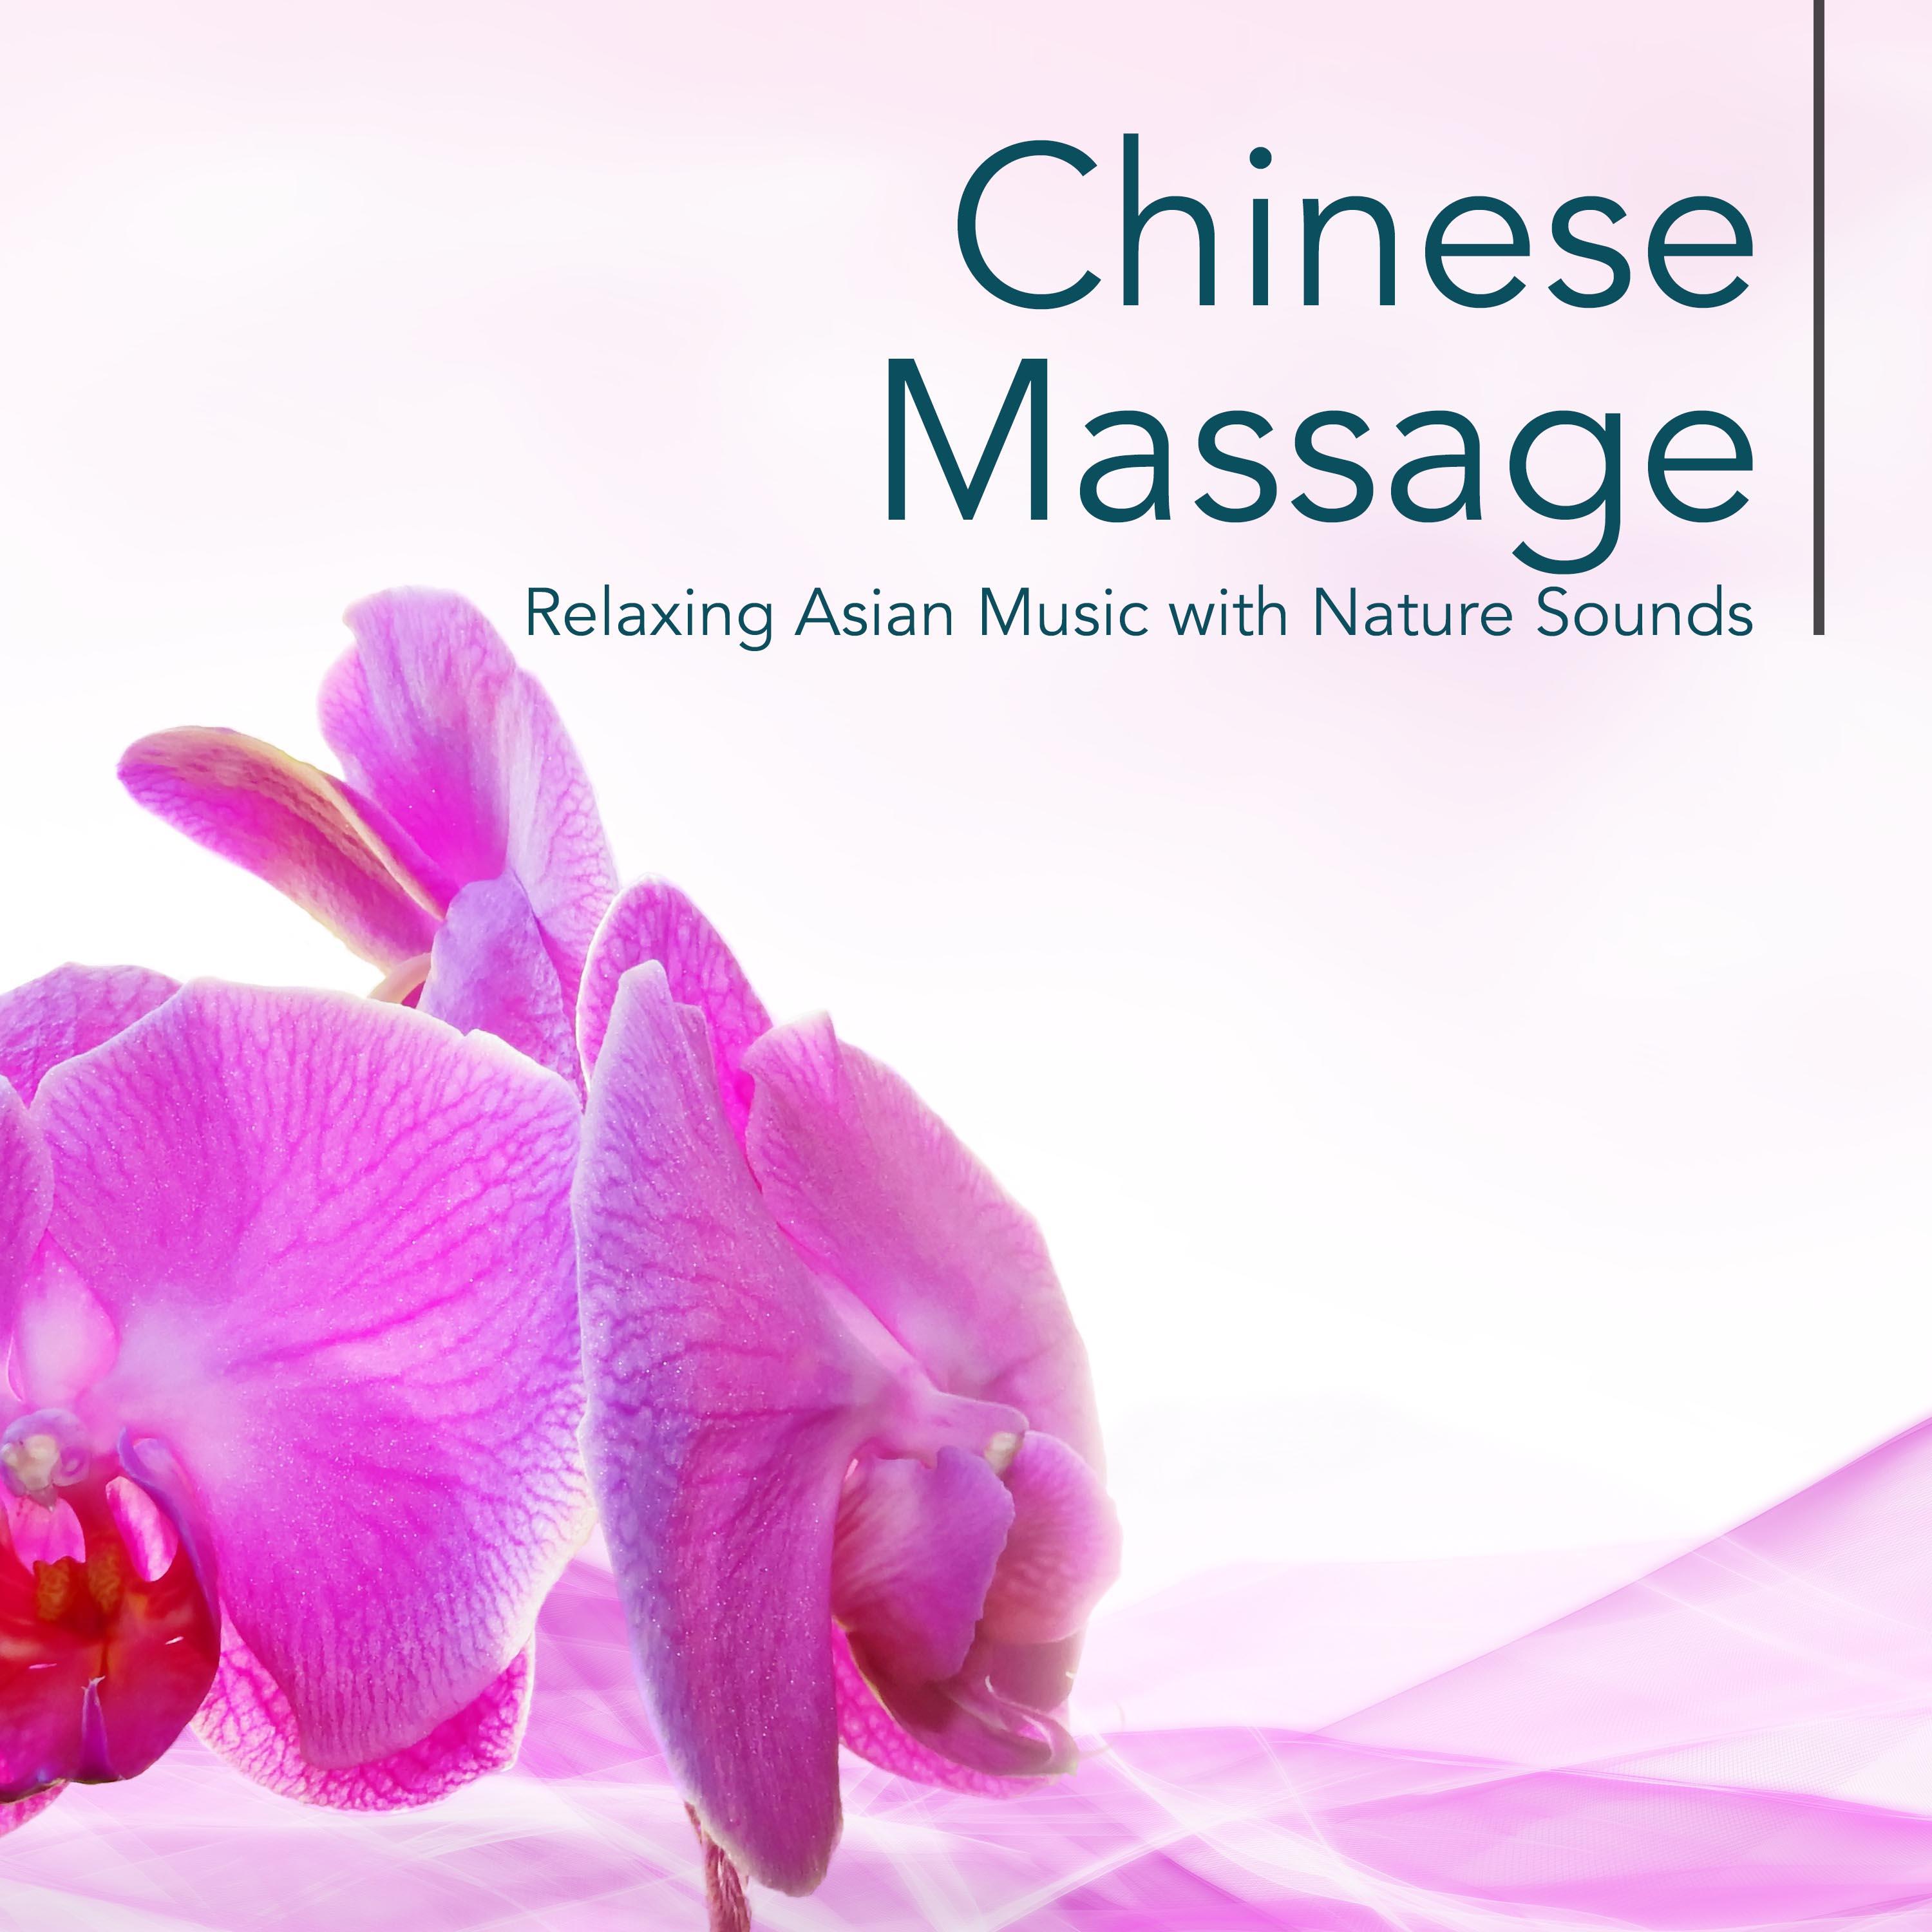 Chinese Massage - Relaxing Asian Music with Nature Sounds for Sensory Stimulation, Meditation, Yoga